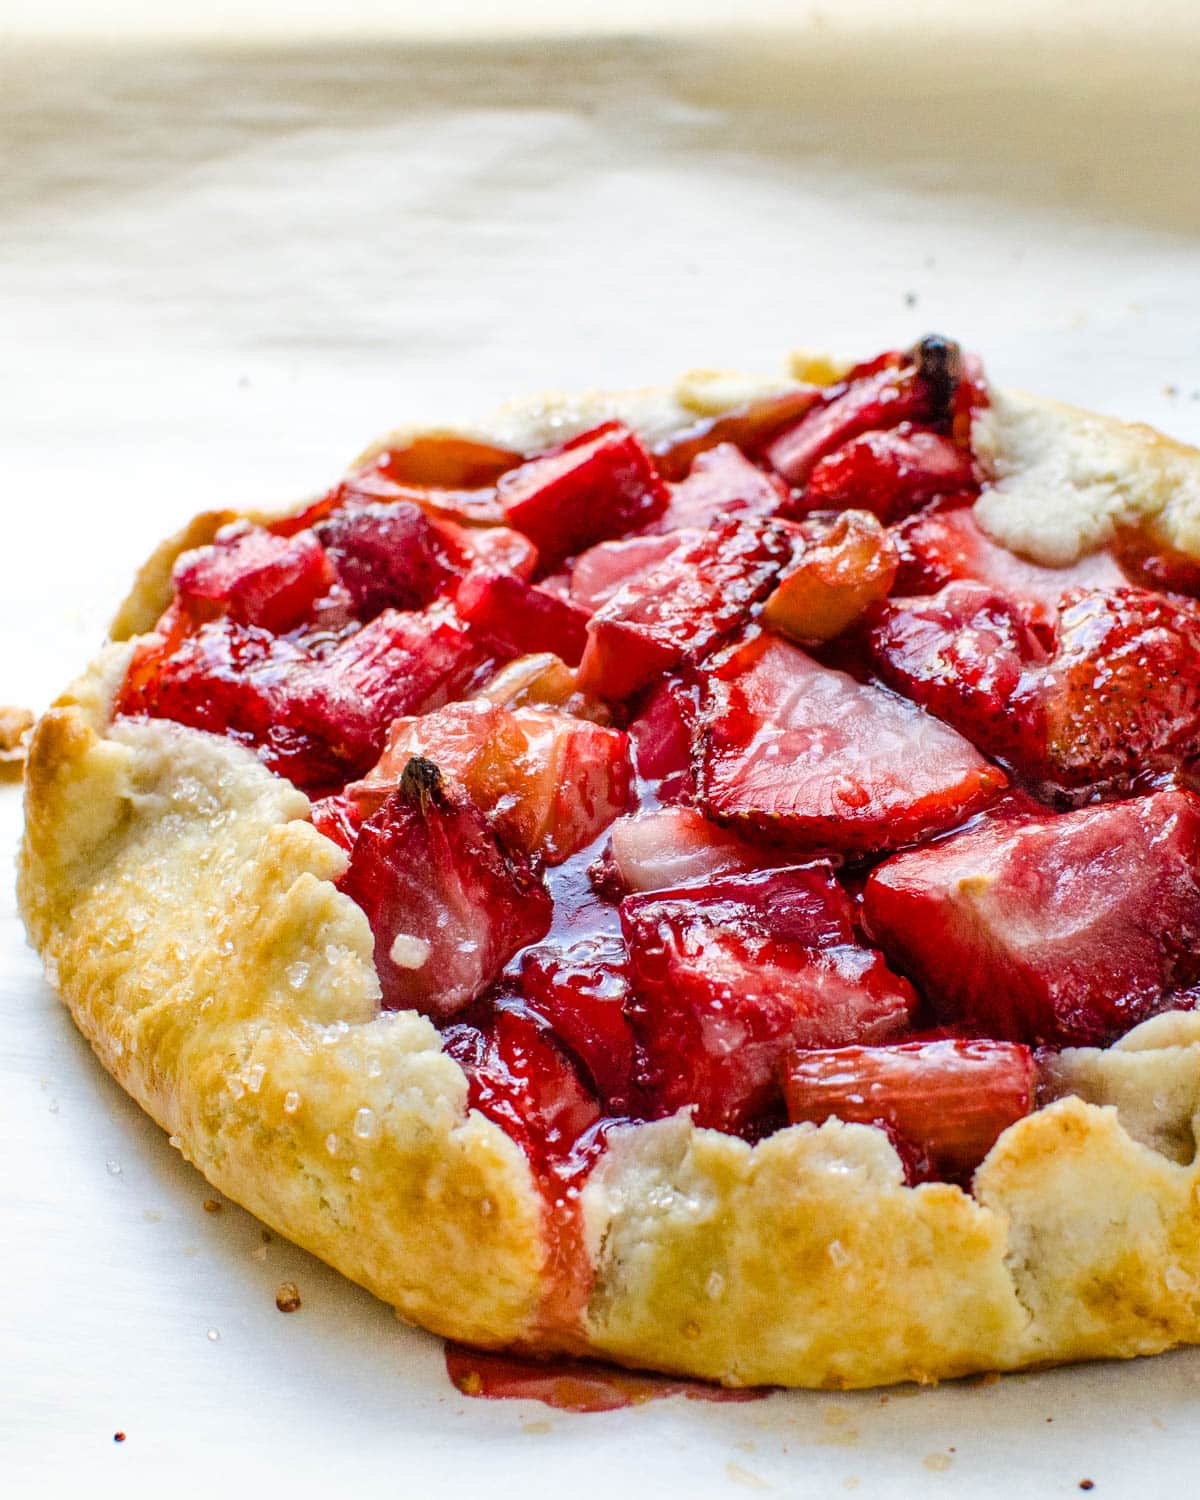 A baked strawberry rhubarb galette on parchment.